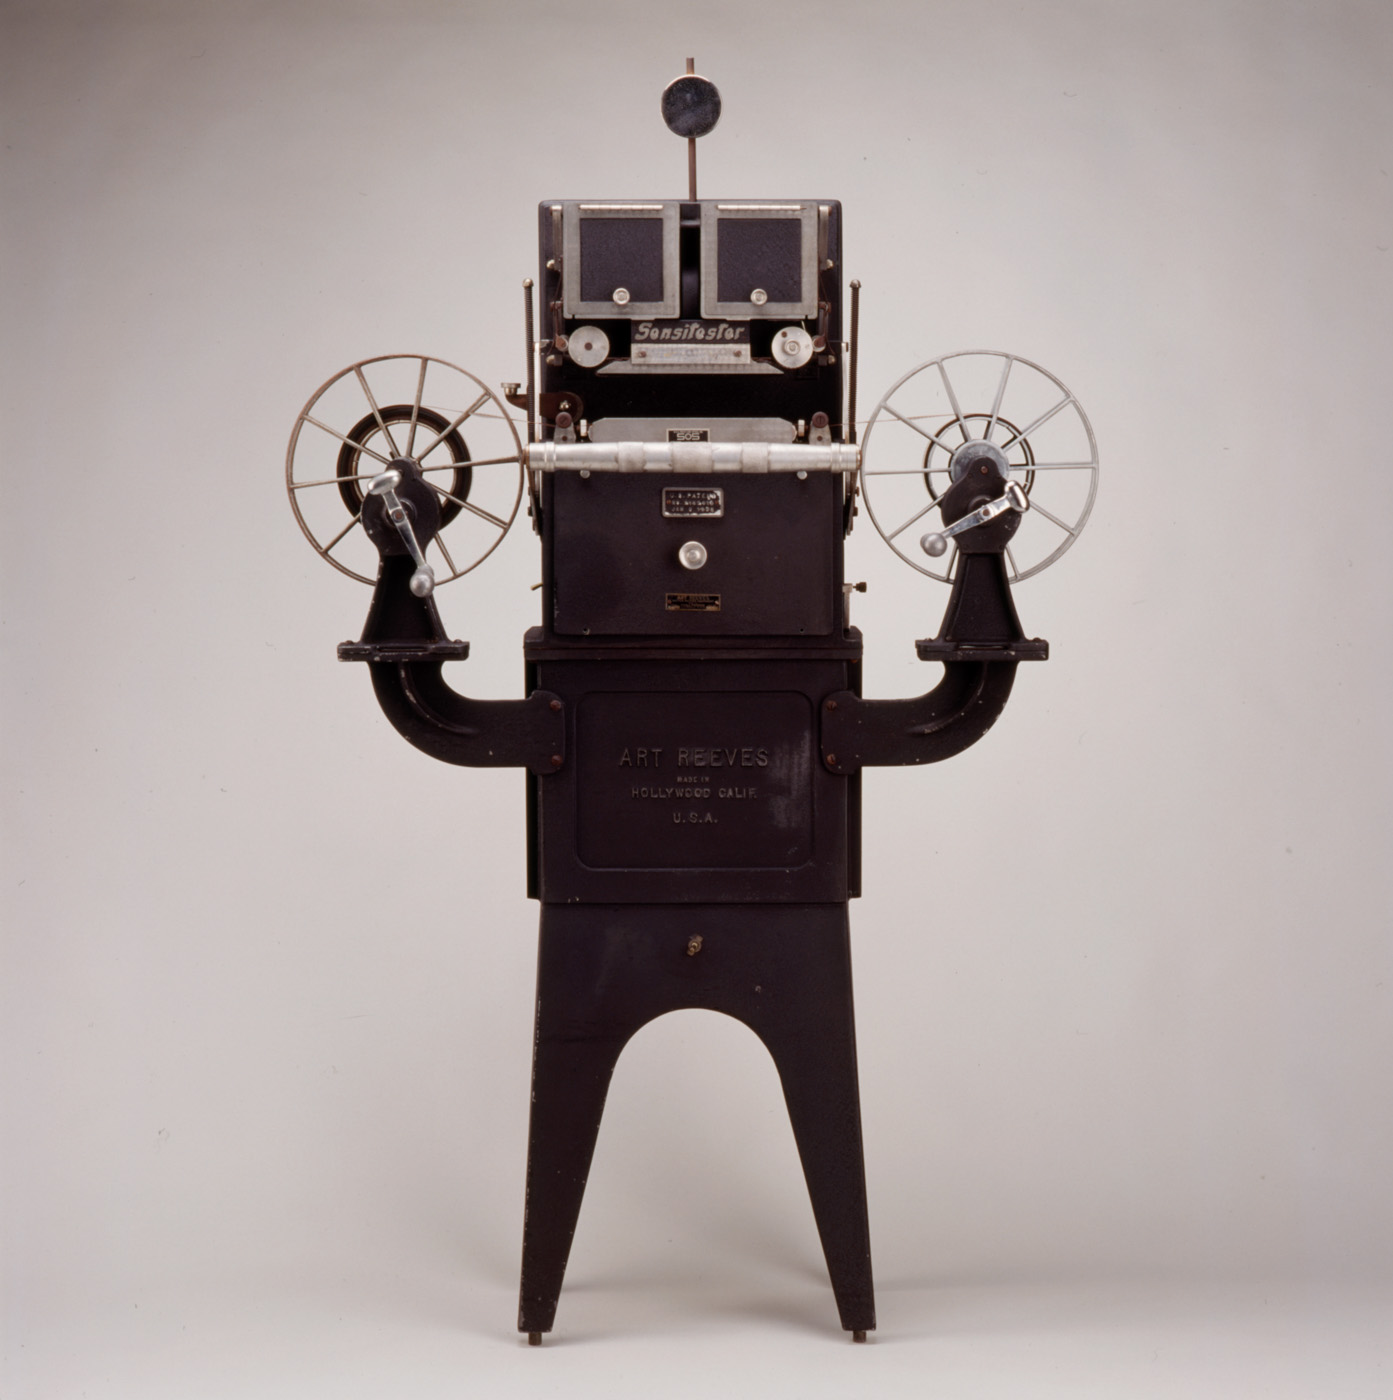 A sensitester motion picture tester, a piece of equipment that looks like a robot holding up two arms that are film reels